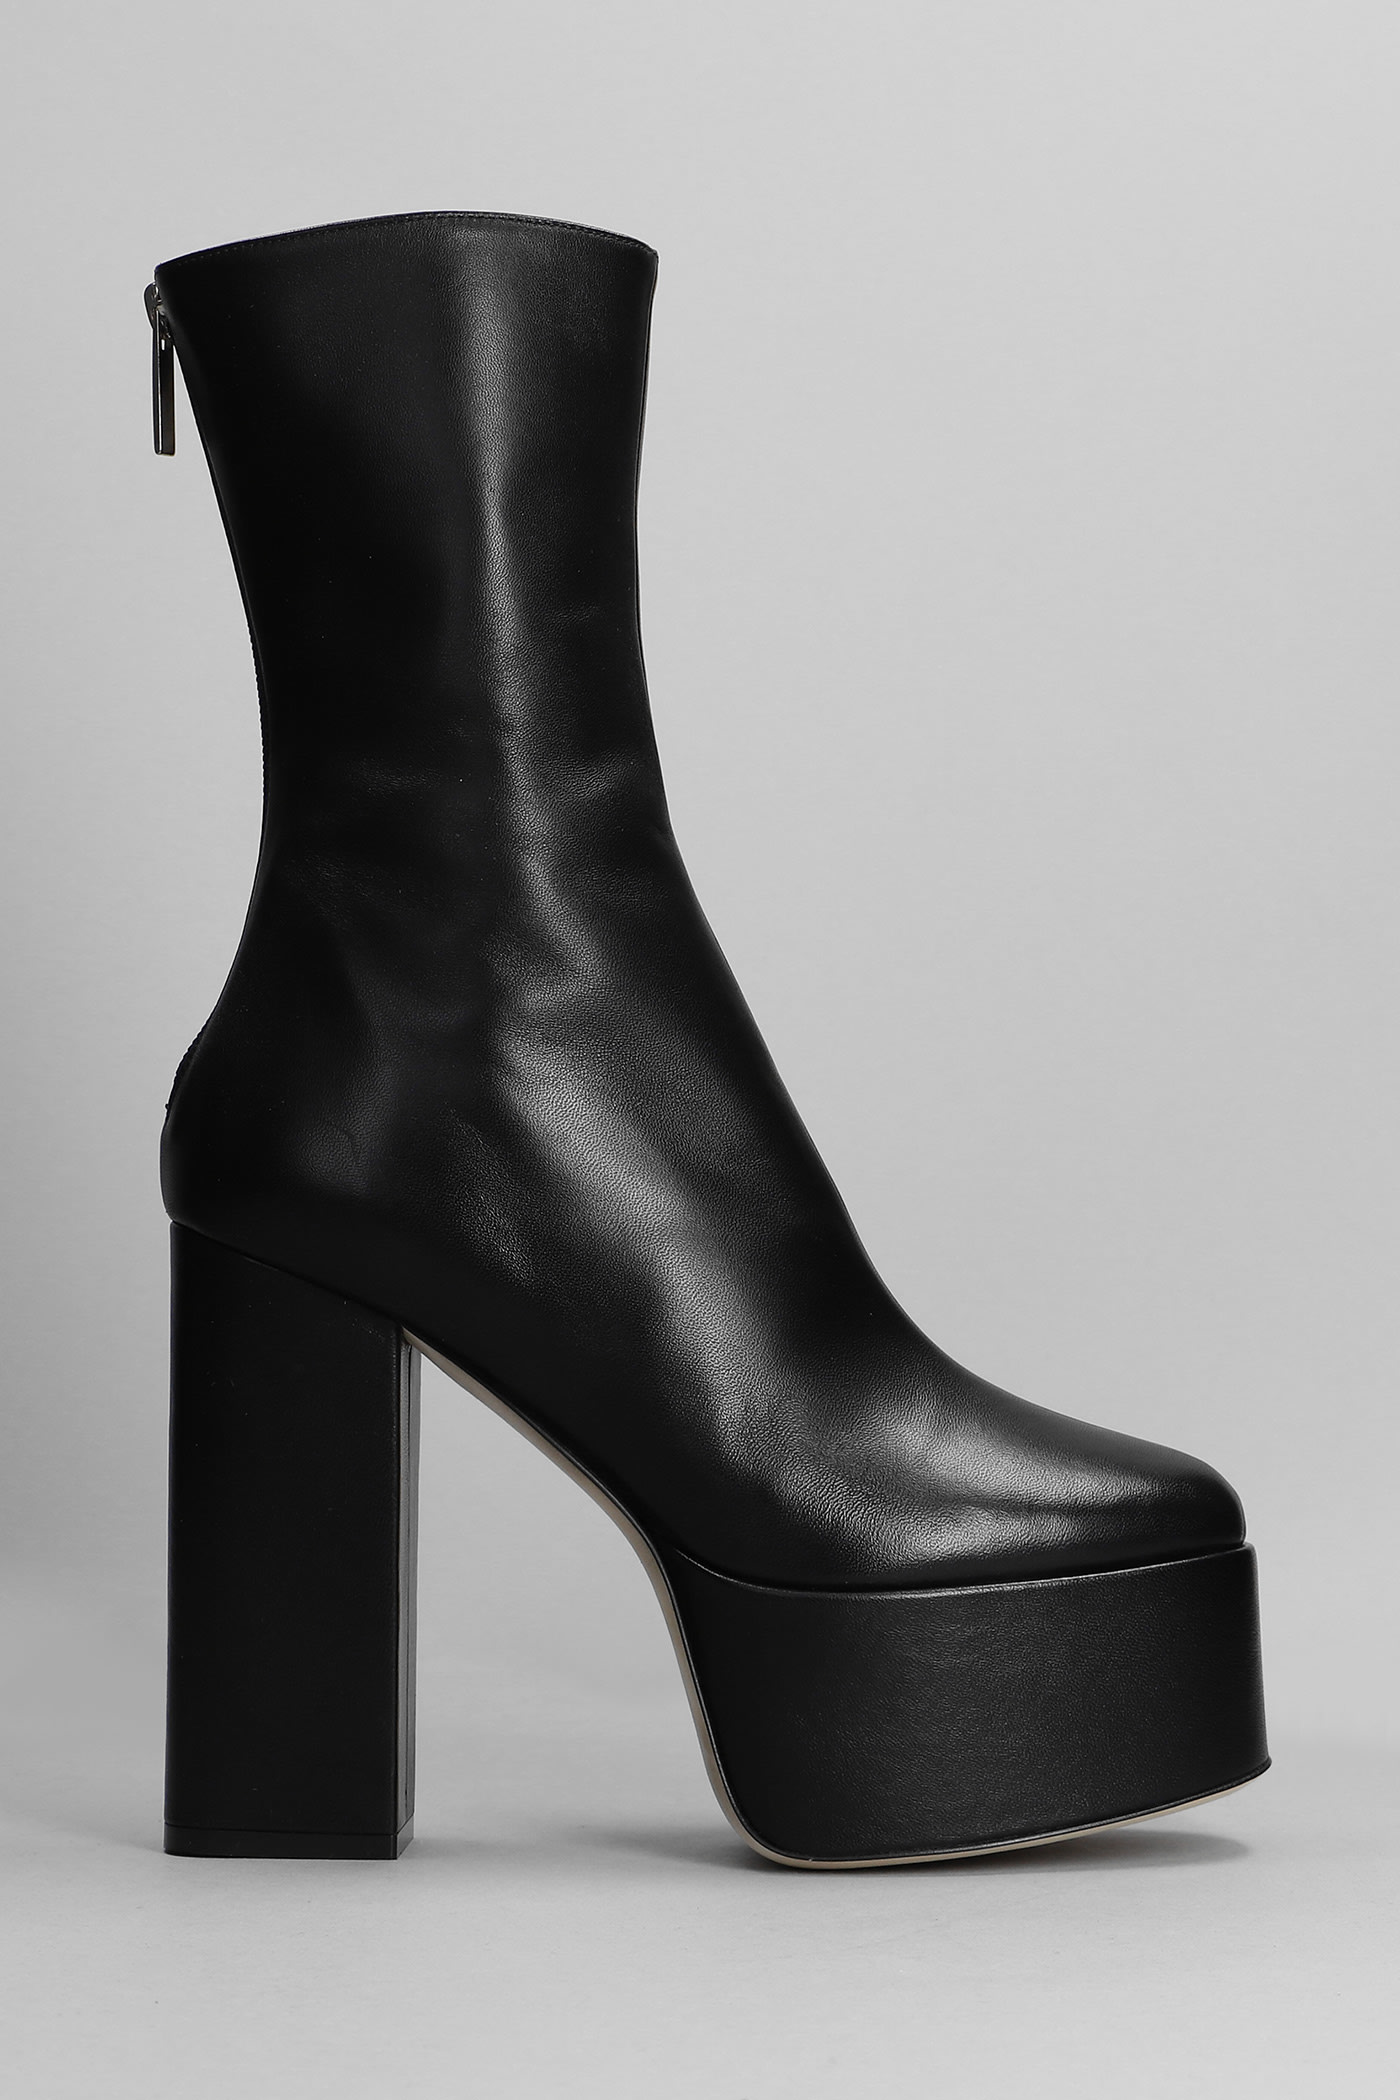 Paris Texas Lexy High Heels Ankle Boots In Black Leather